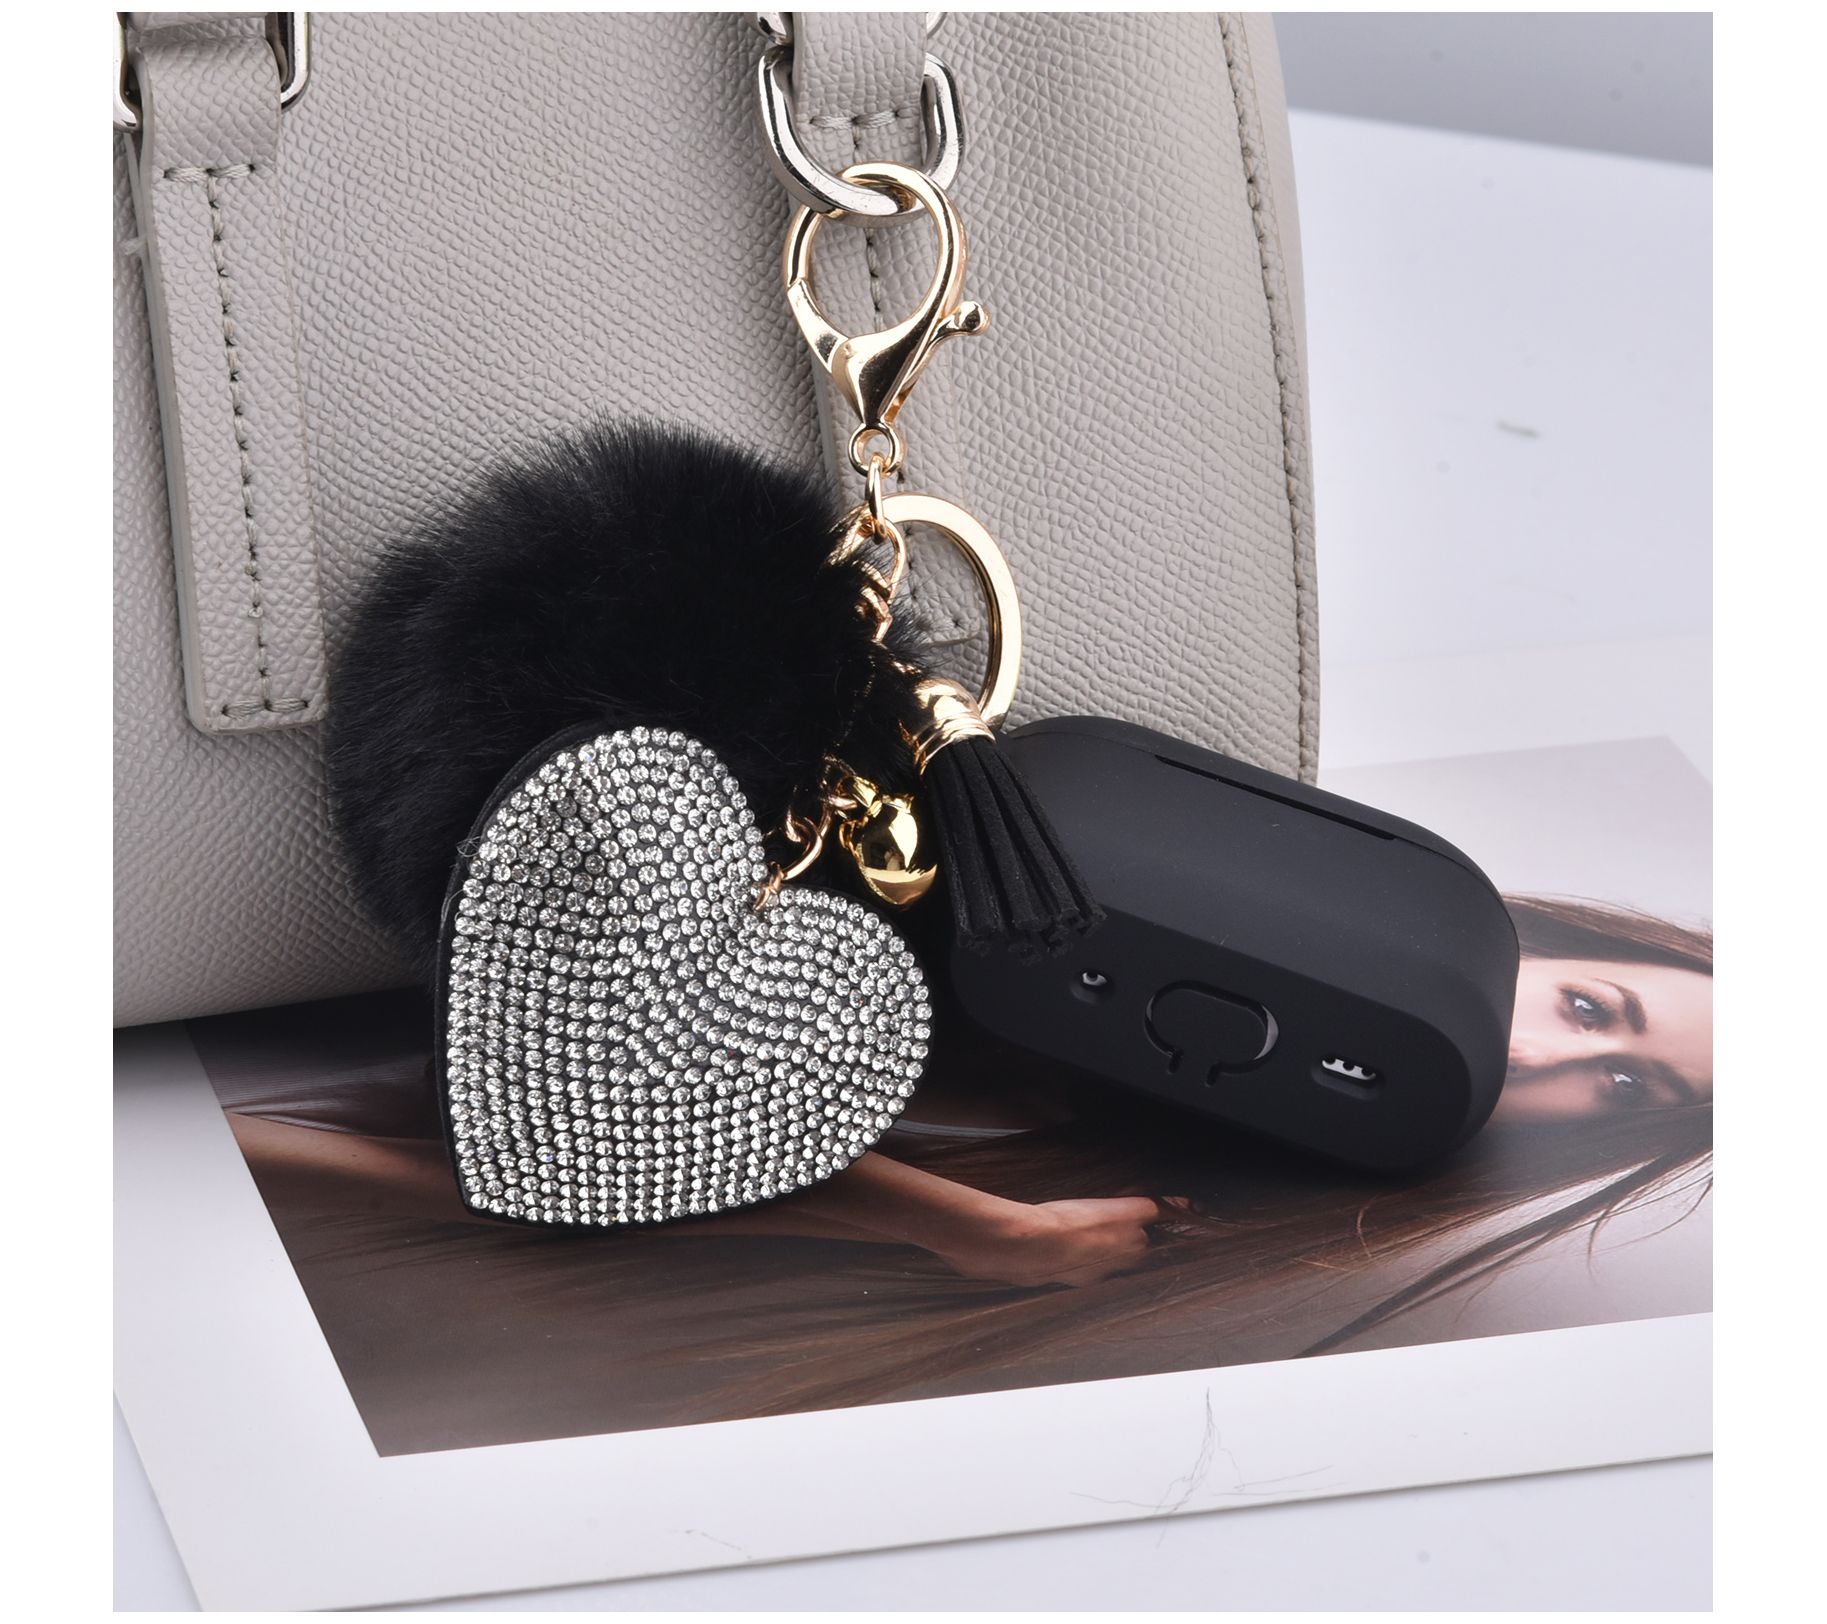 Worryfree Gadgets Case Compatible With Apple Airpods Stylish Bling